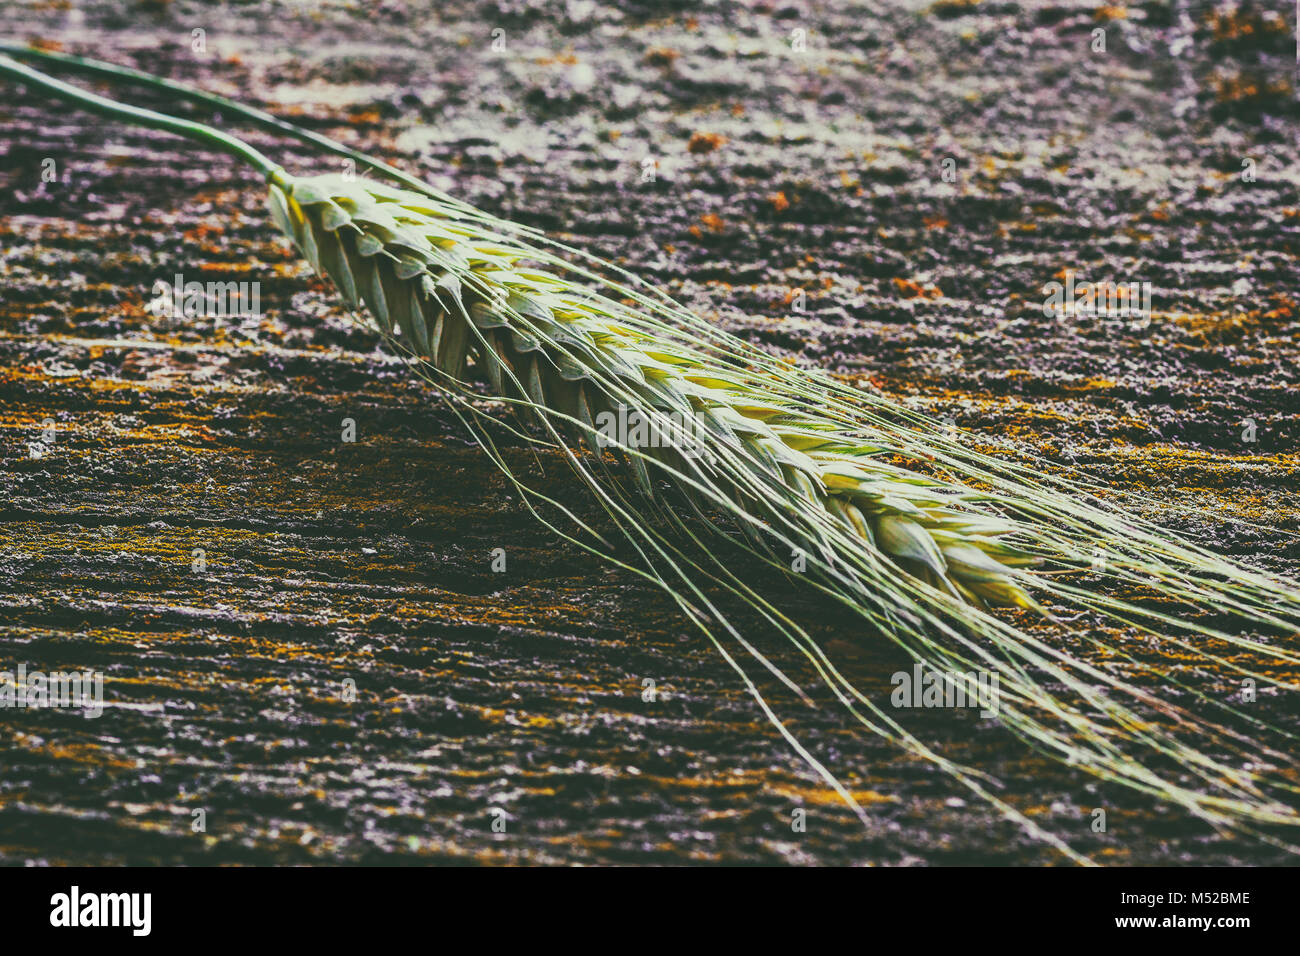 Ears of wheat, close-up Stock Photo